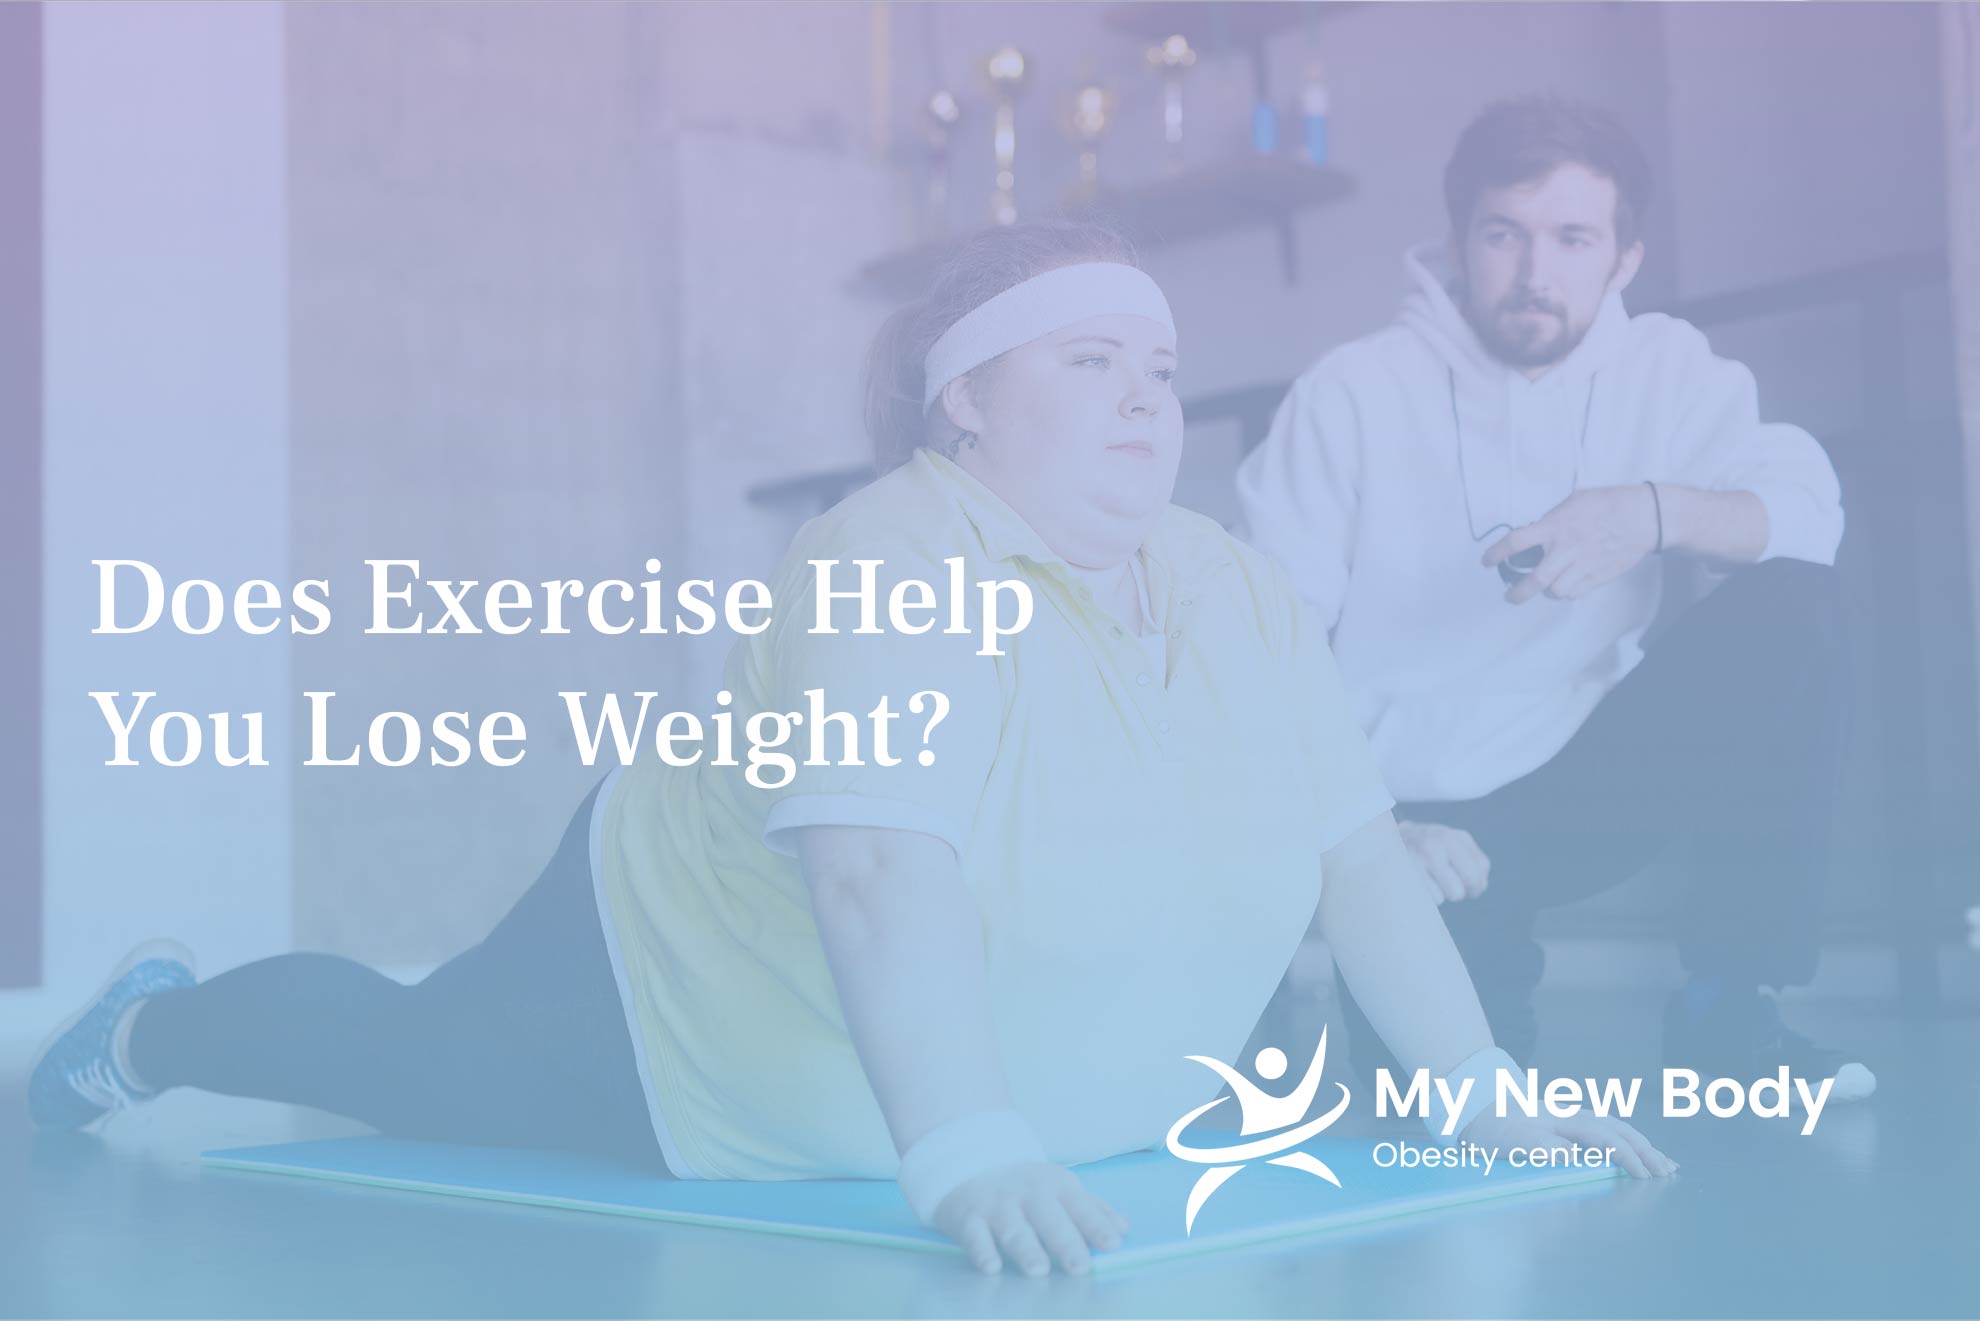 Does Exercise Help You Lose Weight?